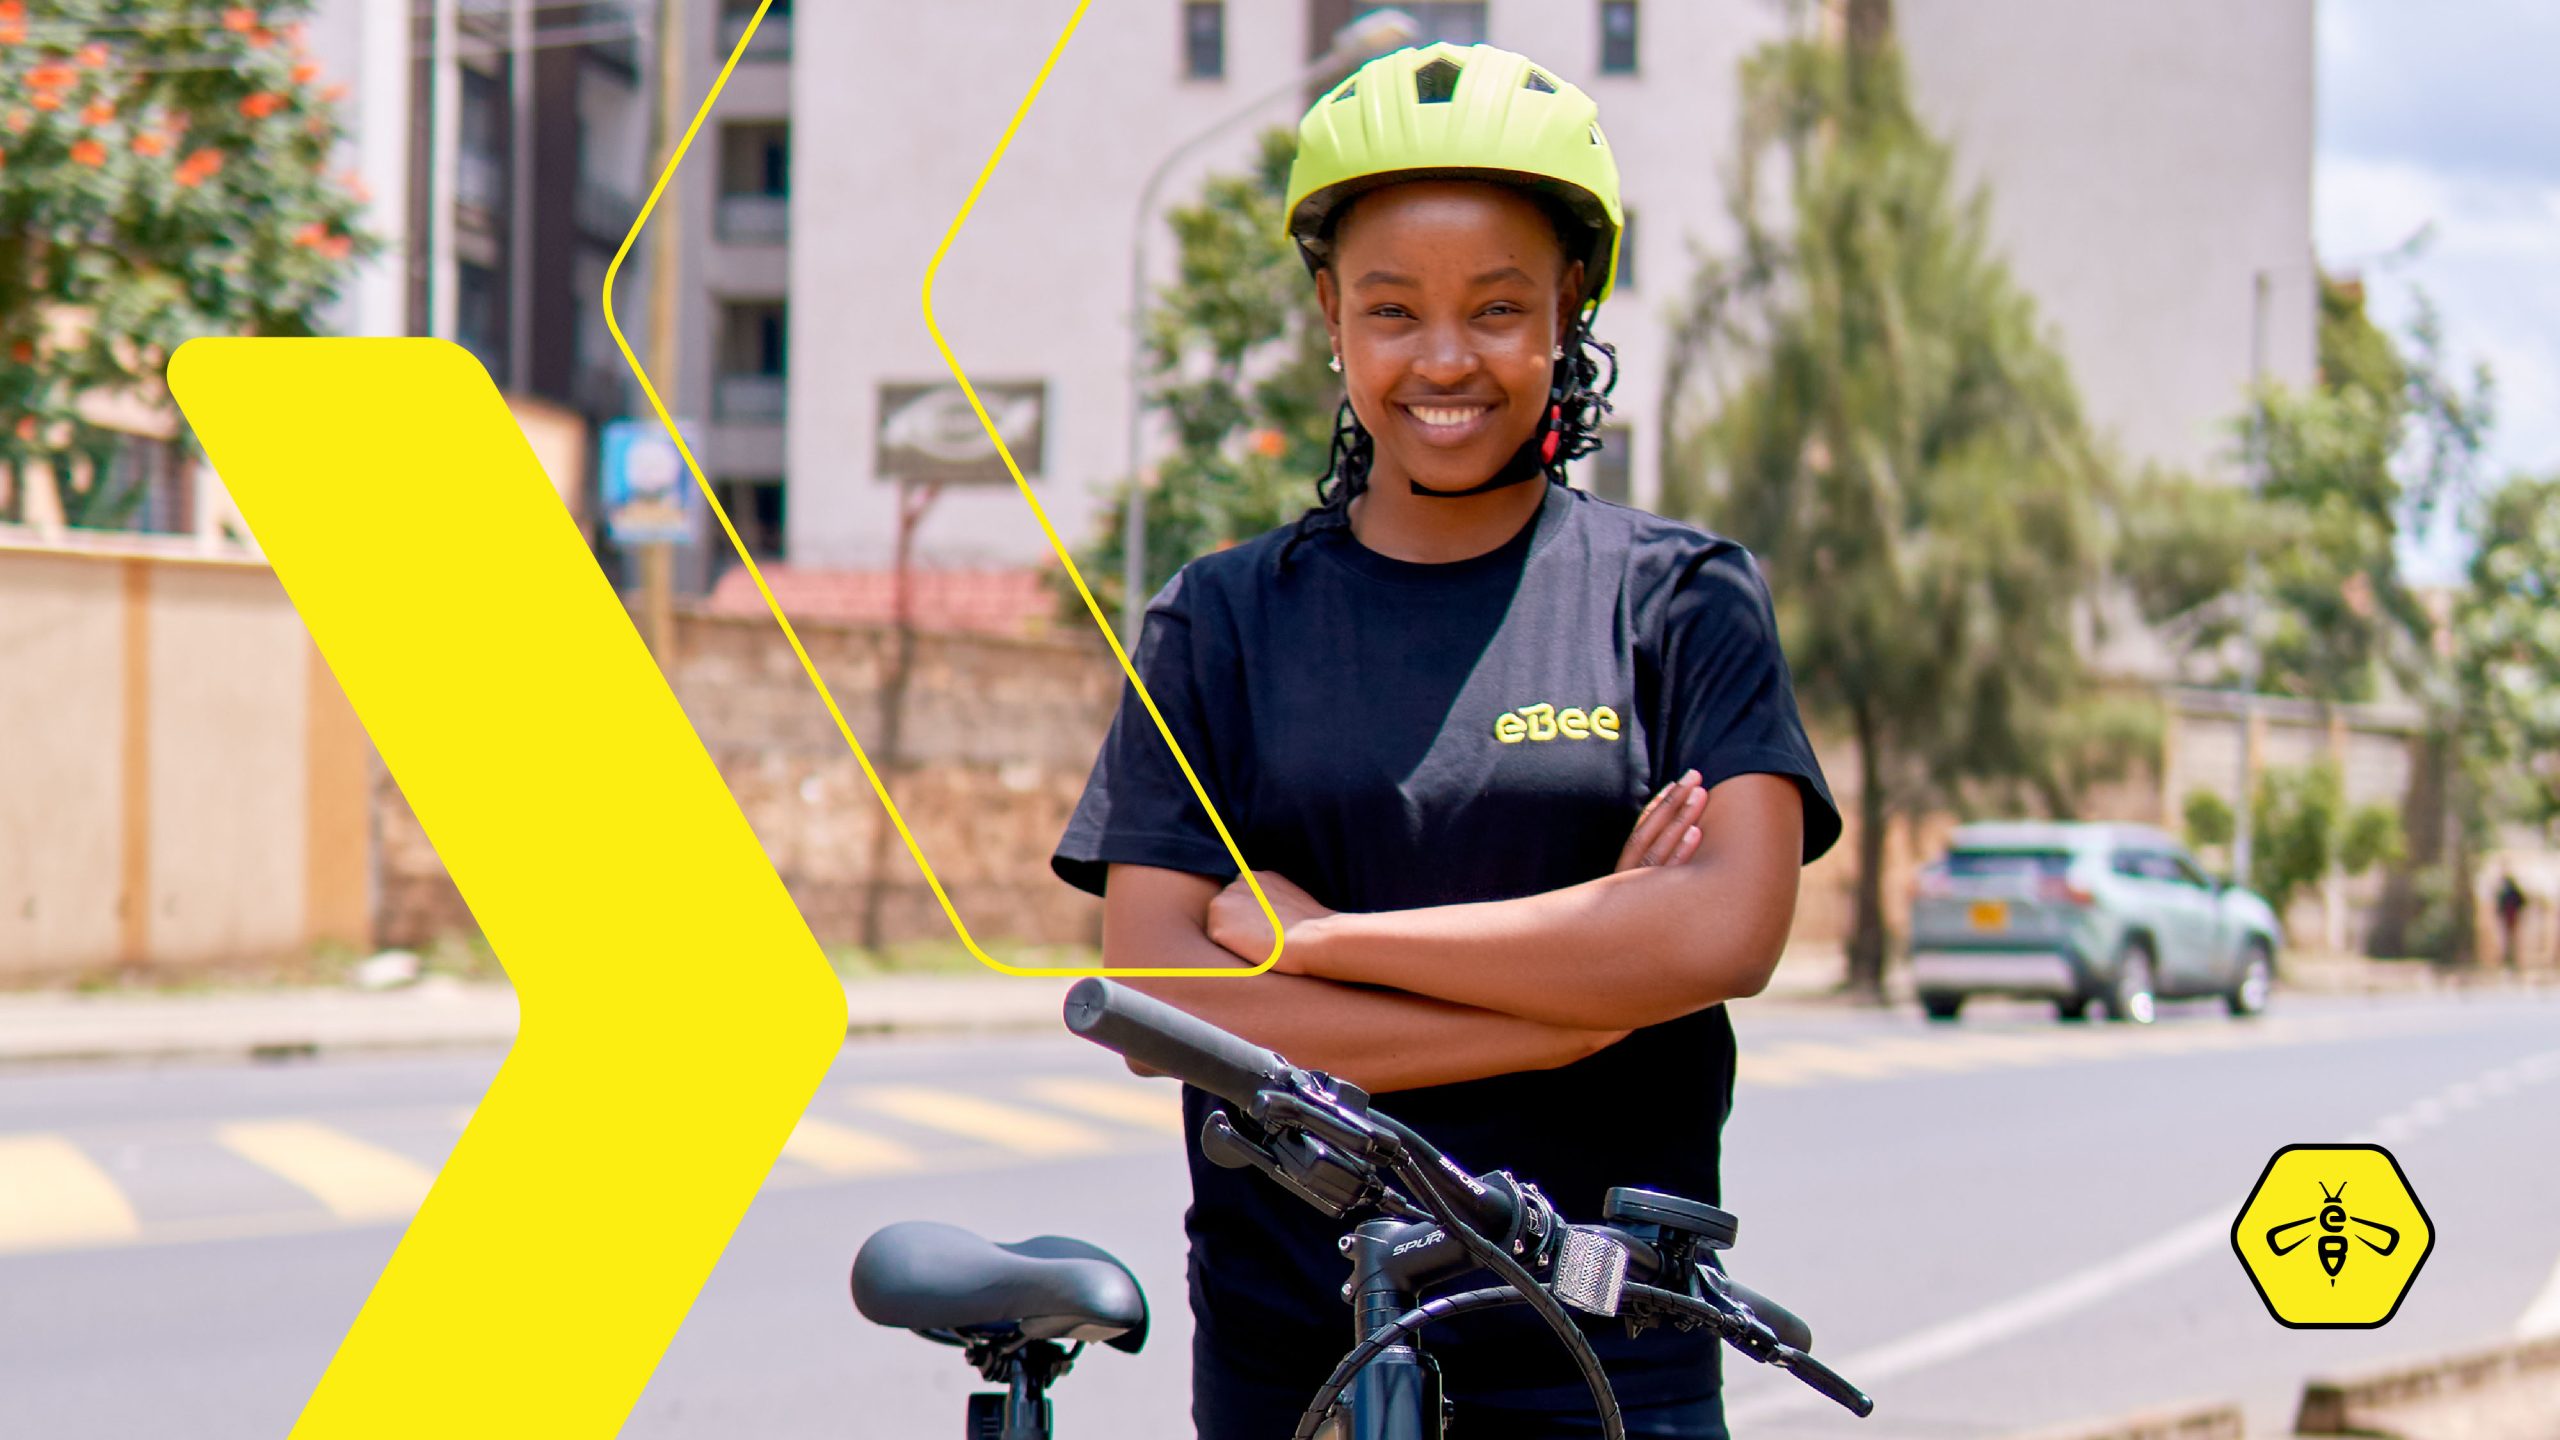 Ride the change with eBee electric bicycles. 